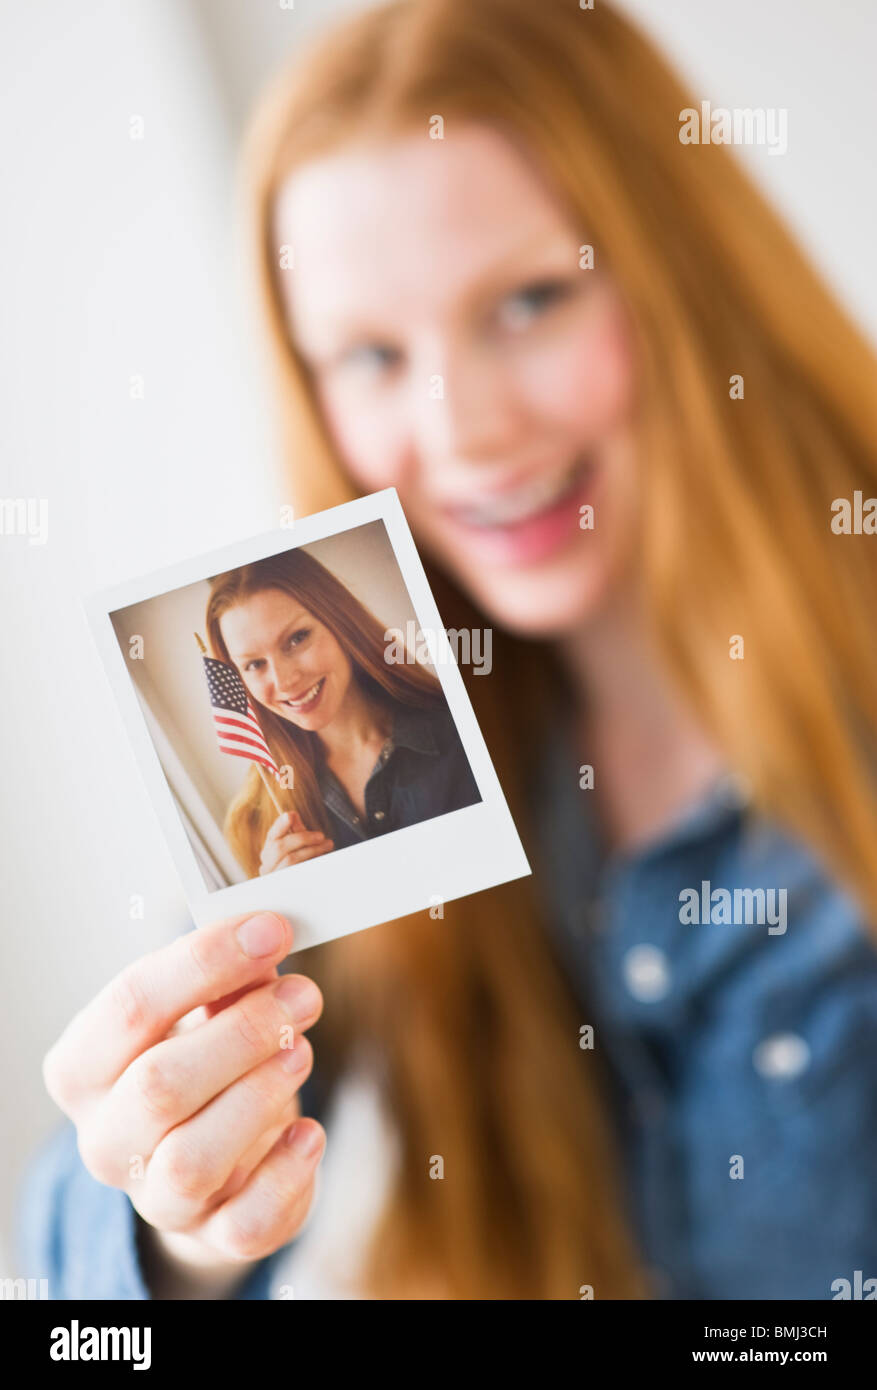 Woman holding photograph of herself Stock Photo